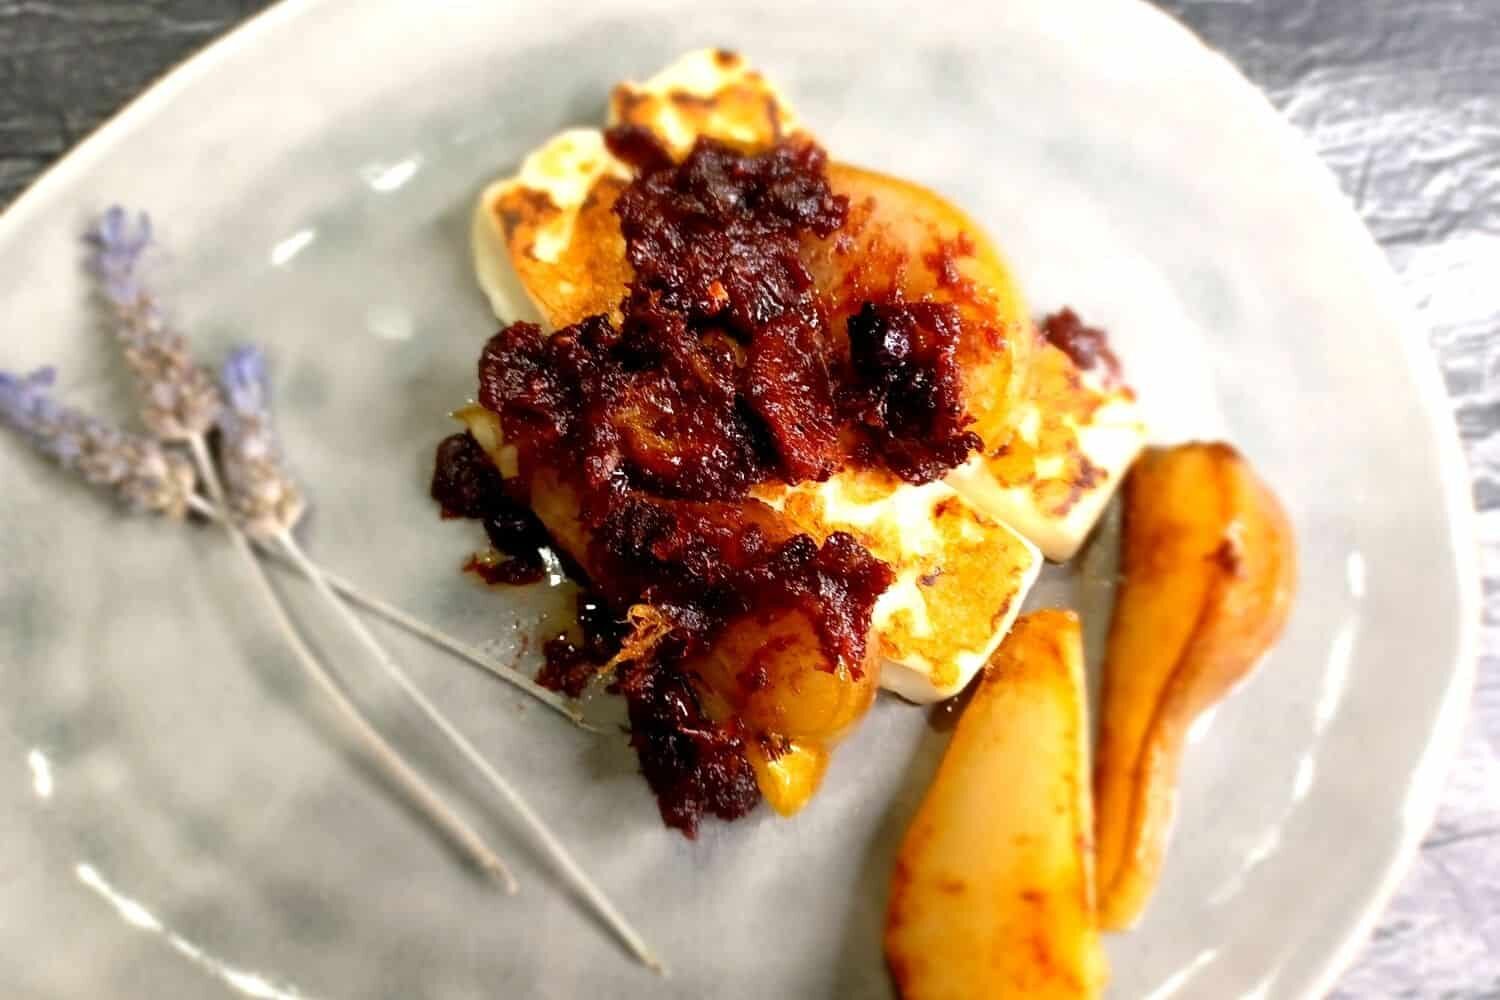 Fried Halloumi Cheese and Pears, Spiced Dates with Blueberries